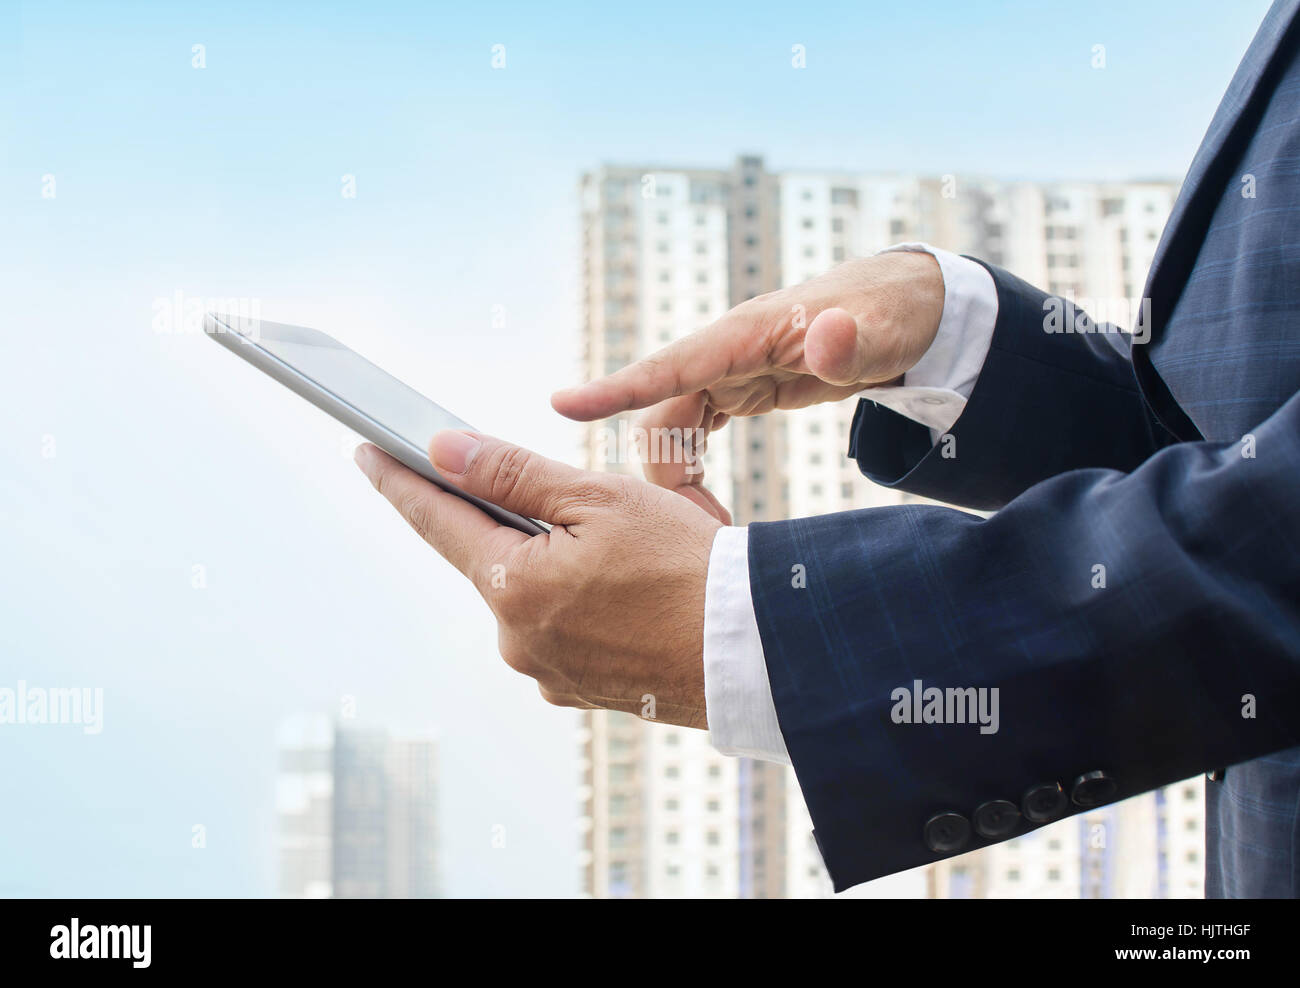 Hands of a businessman holding digital tablet Stock Photo